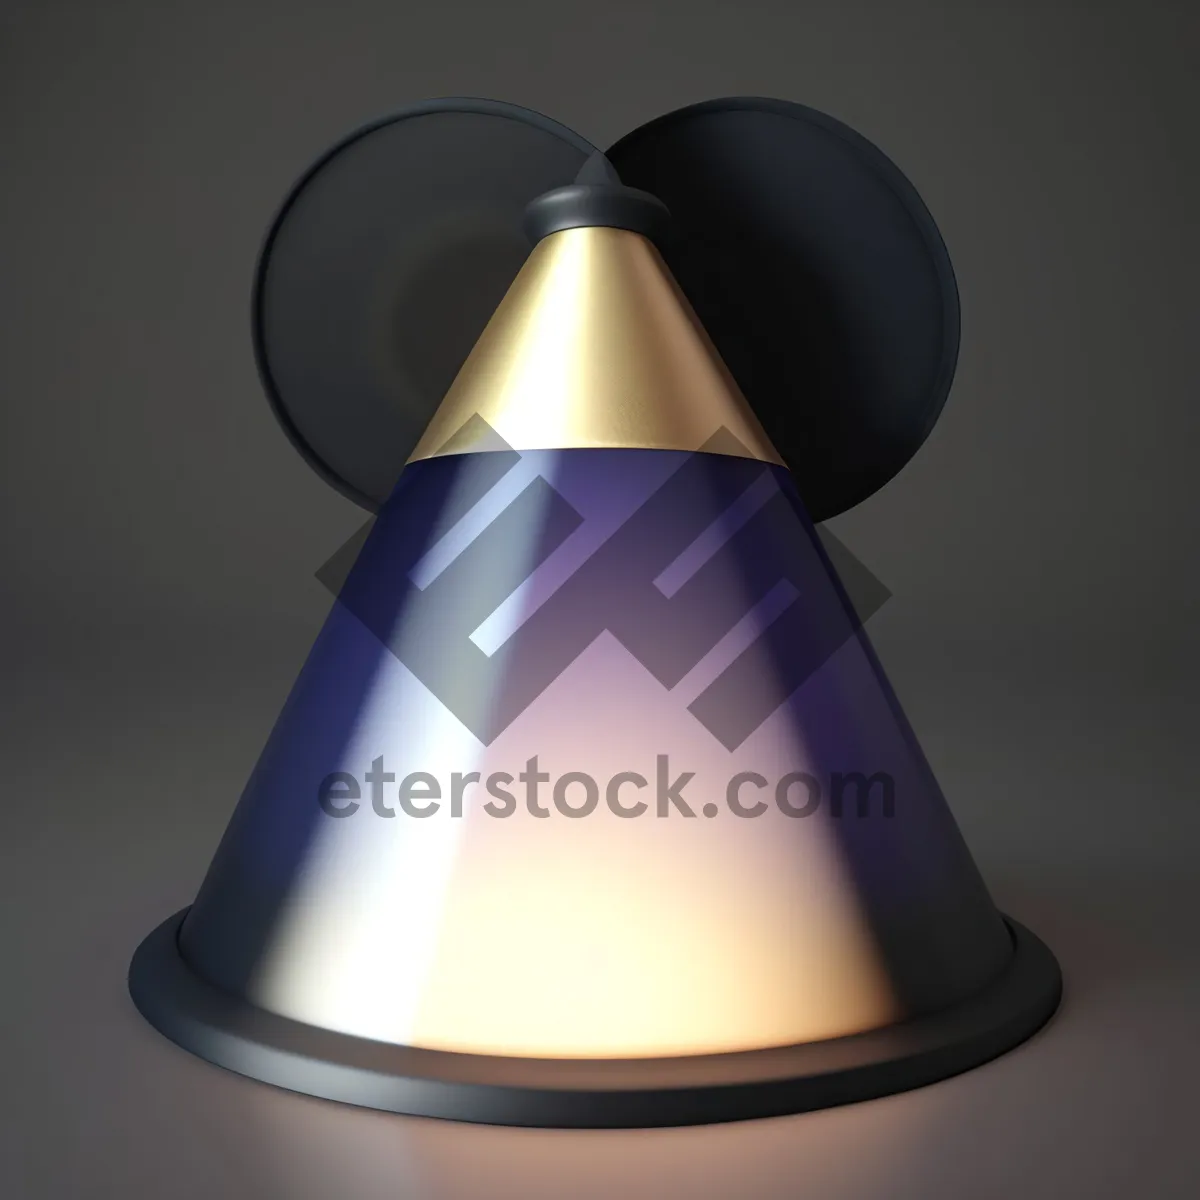 Picture of Mystical Sorcerer Conjurings: 3D Iconic Glass Symbol